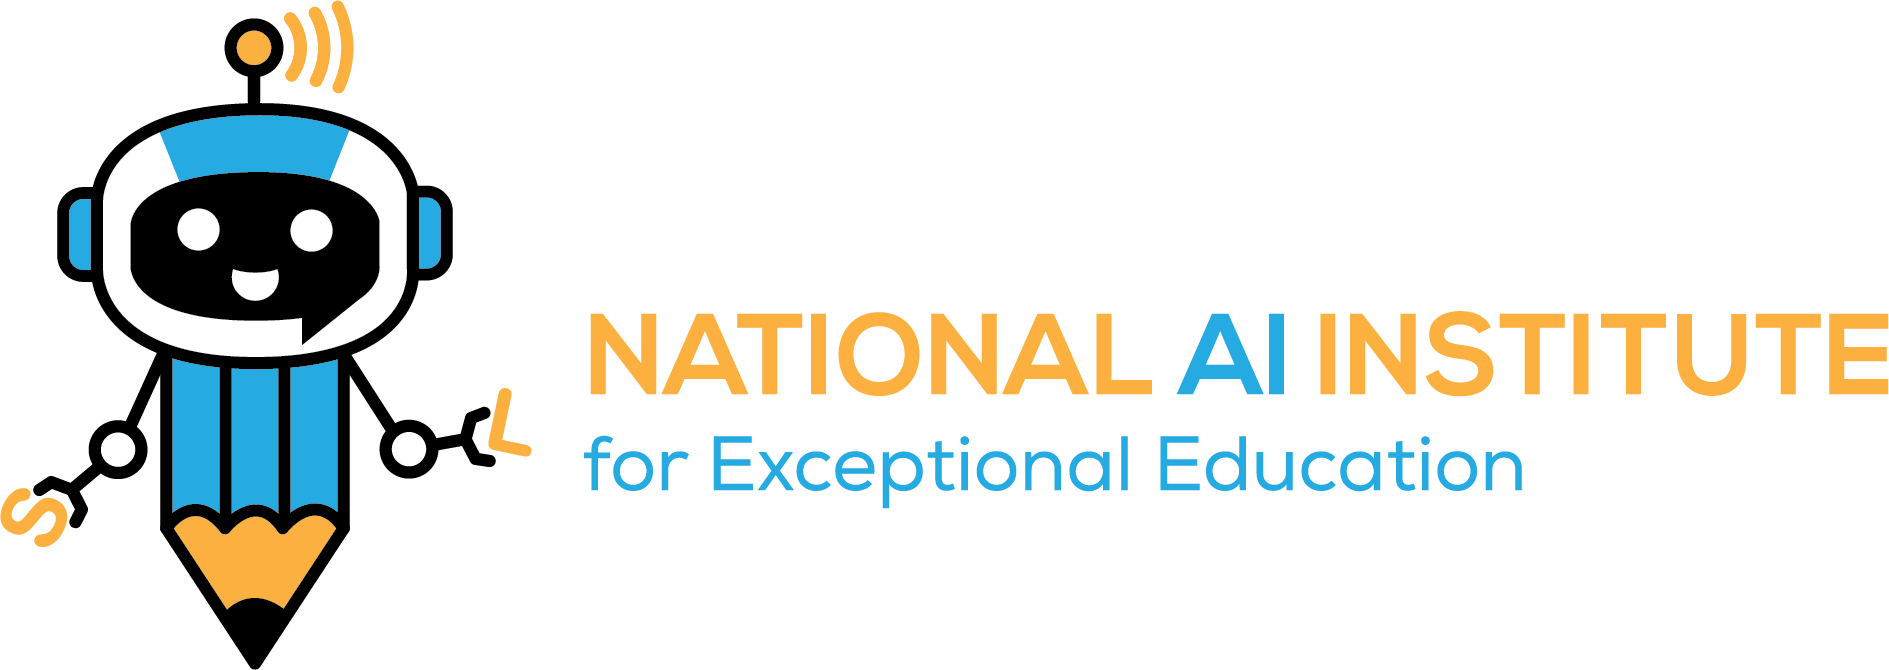 NSF AI Institute for Exceptional Education AI4ExceptionalEd Logo